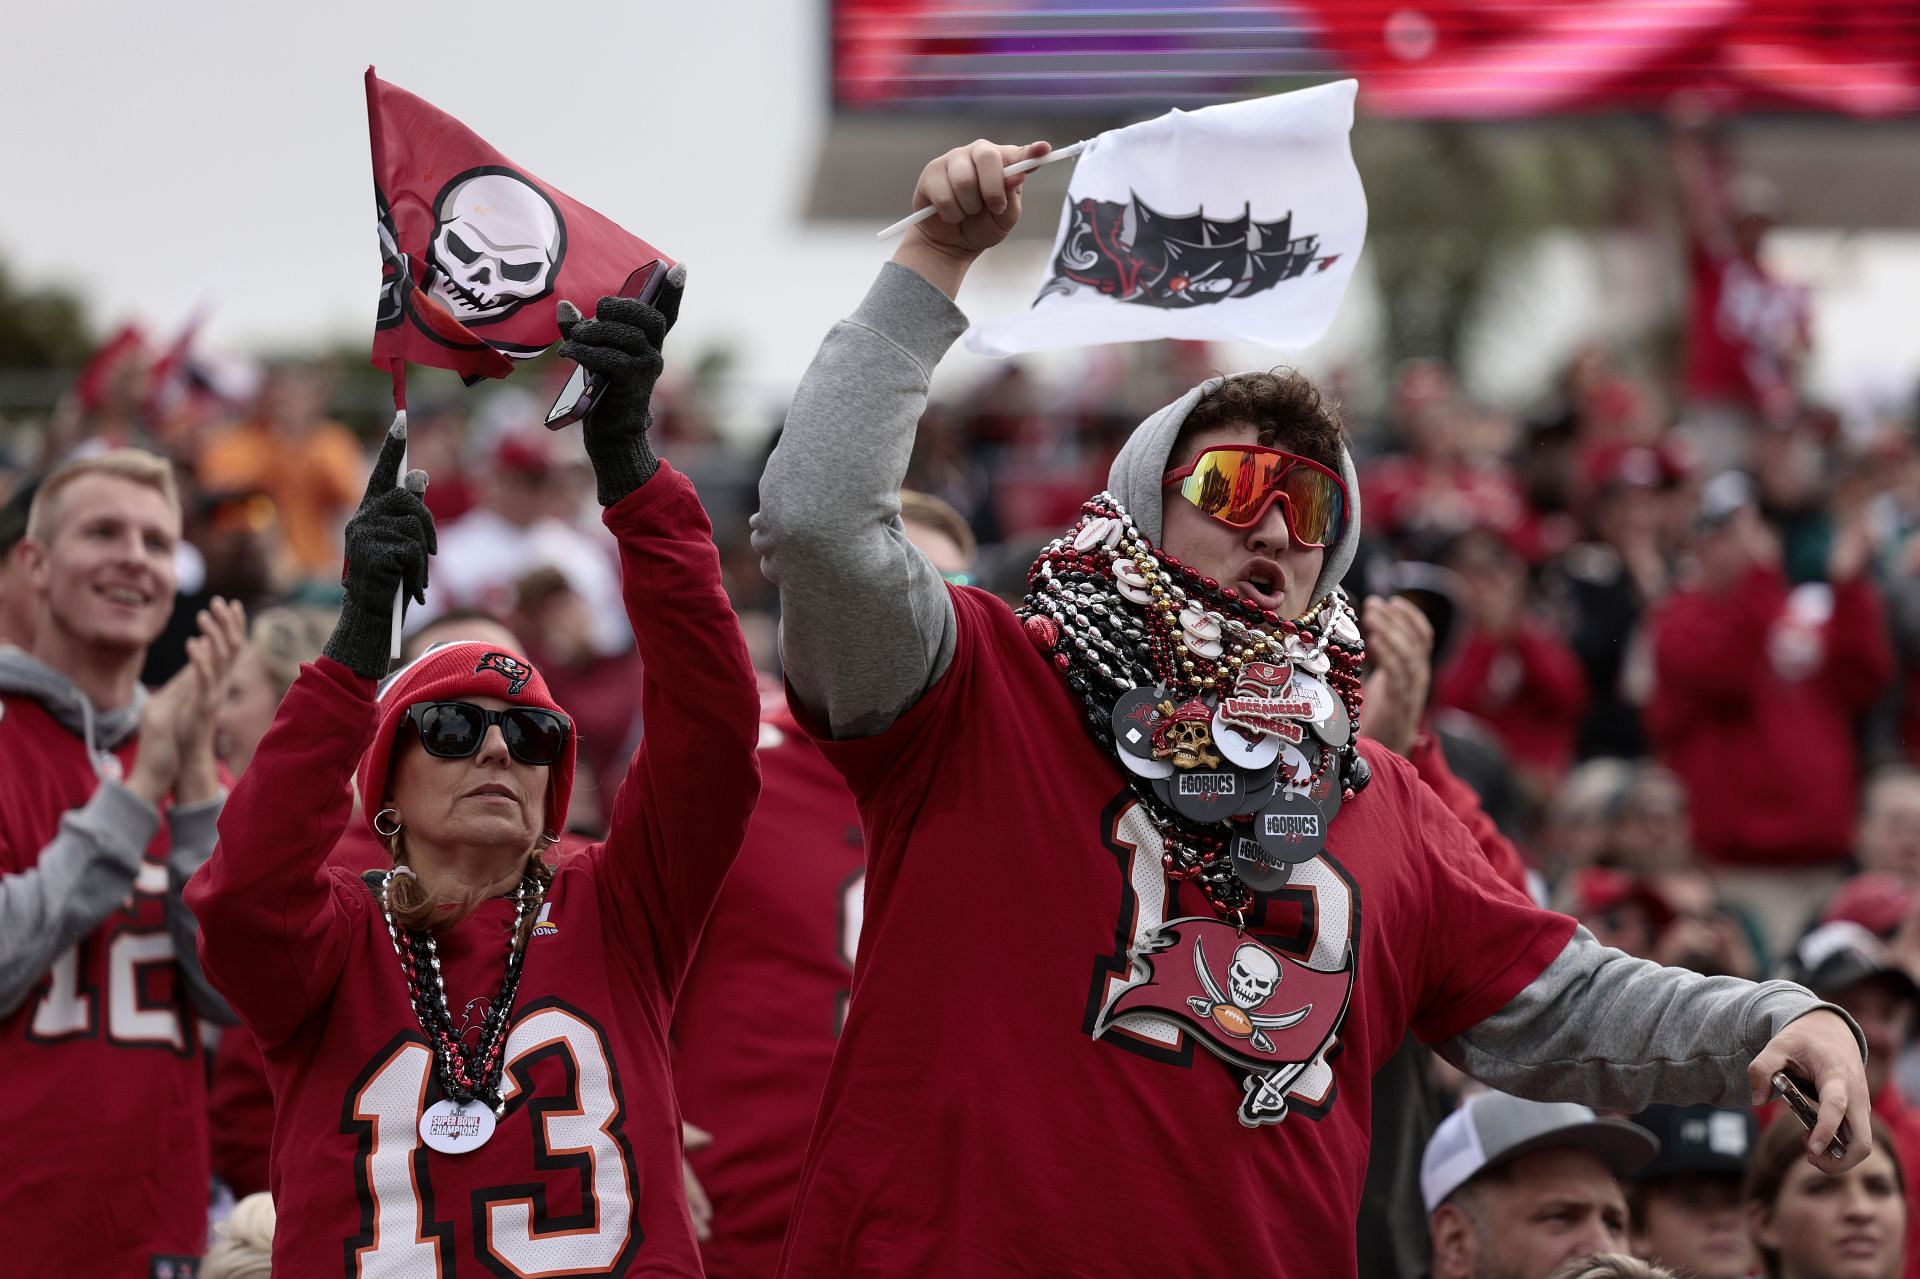 WATCH: Brutal fight breaks out between Buccaneers and Eagles fans during  heated playoff battle